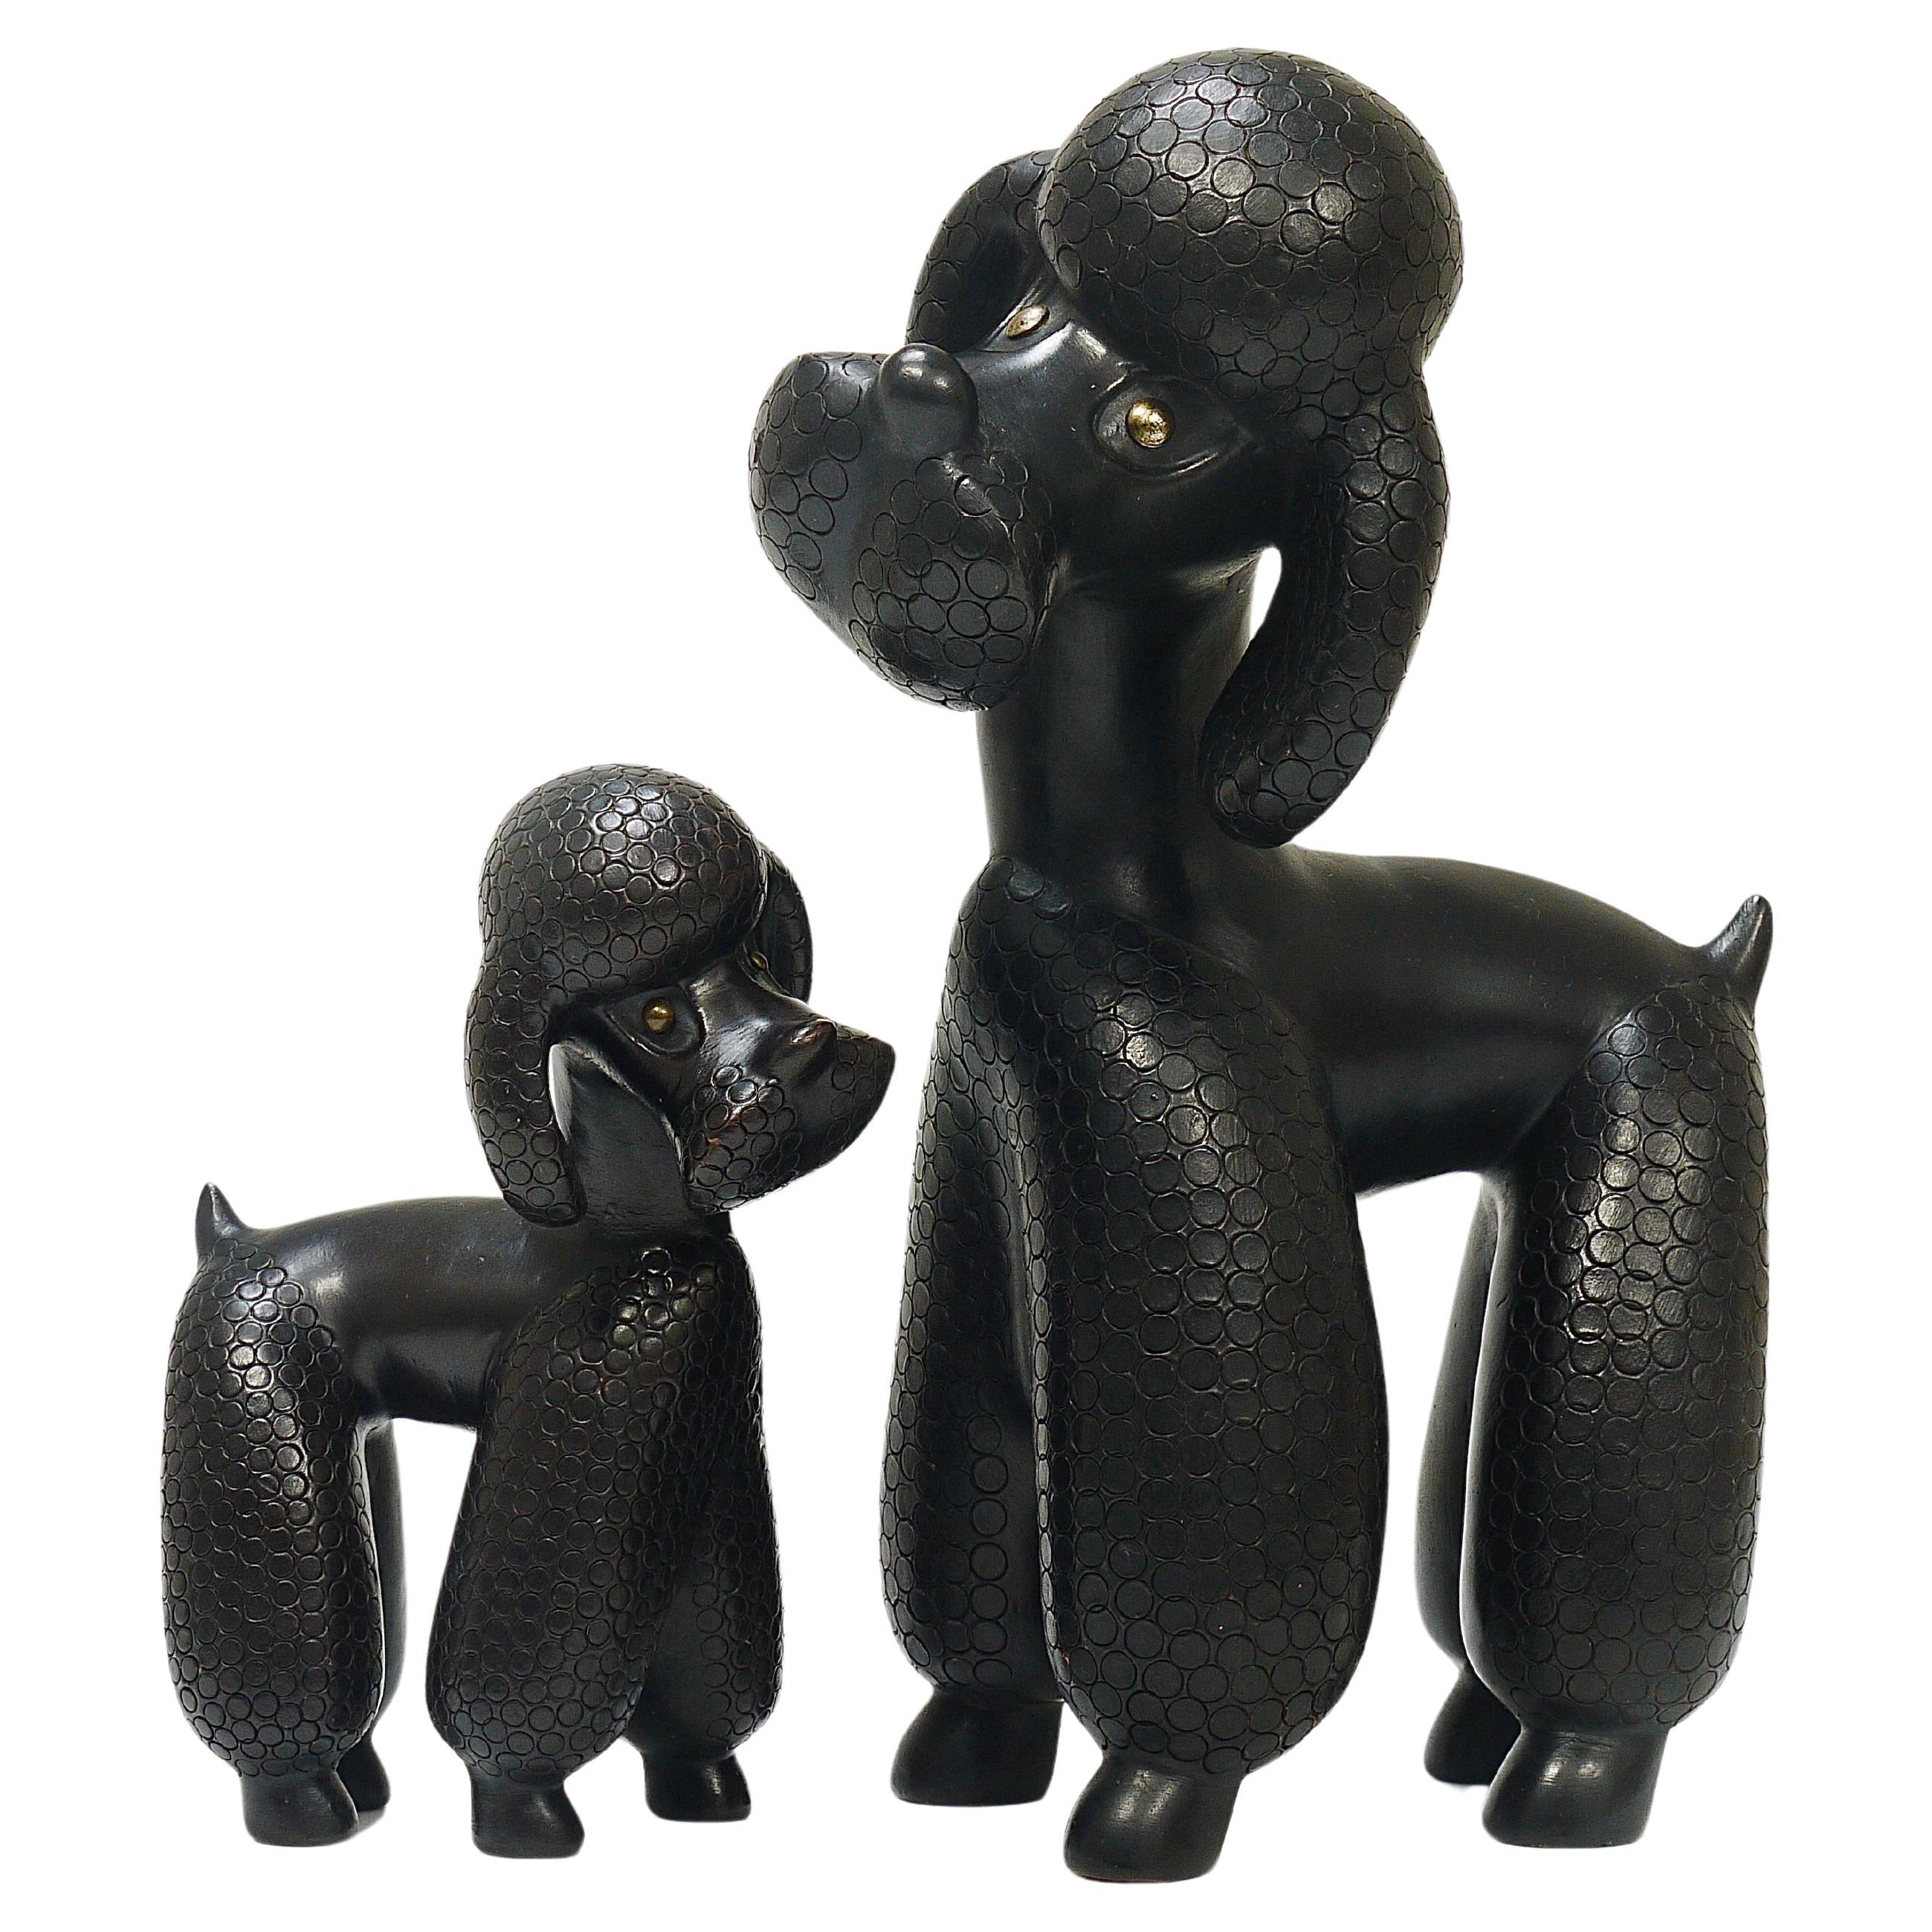 Pair of Mid-Century Dog Poodle Sculptures by Leopold Anzengruber, Austria, 1950s